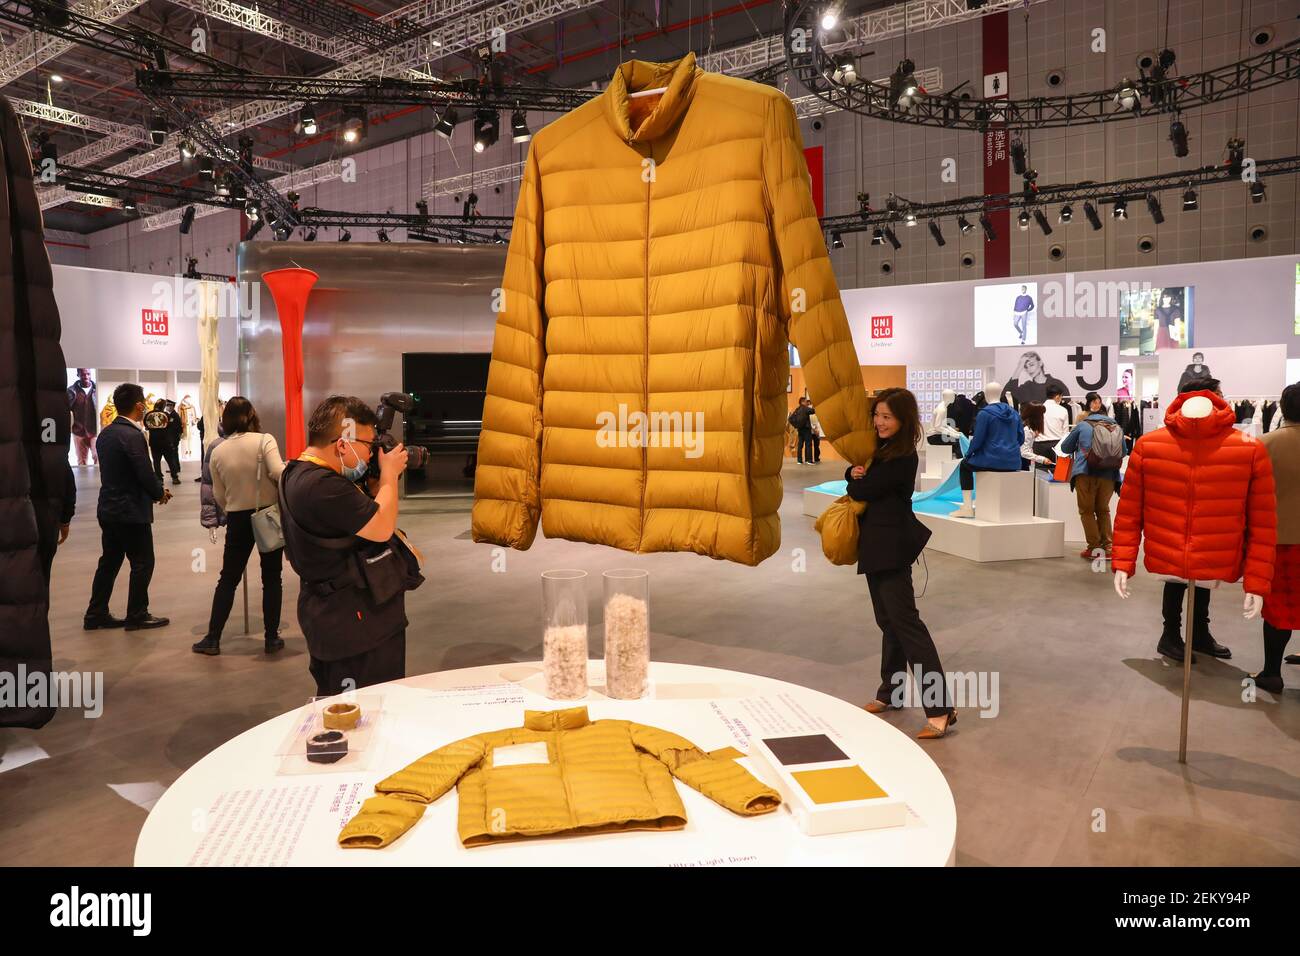 Japanese clothing brand Uniqlo sets up a 1,500-square-meter exhibition area  named "Museum of Tomorrow" at the China International Import Expo, 3 giant  down jackets suspended in the air attract lots of attention